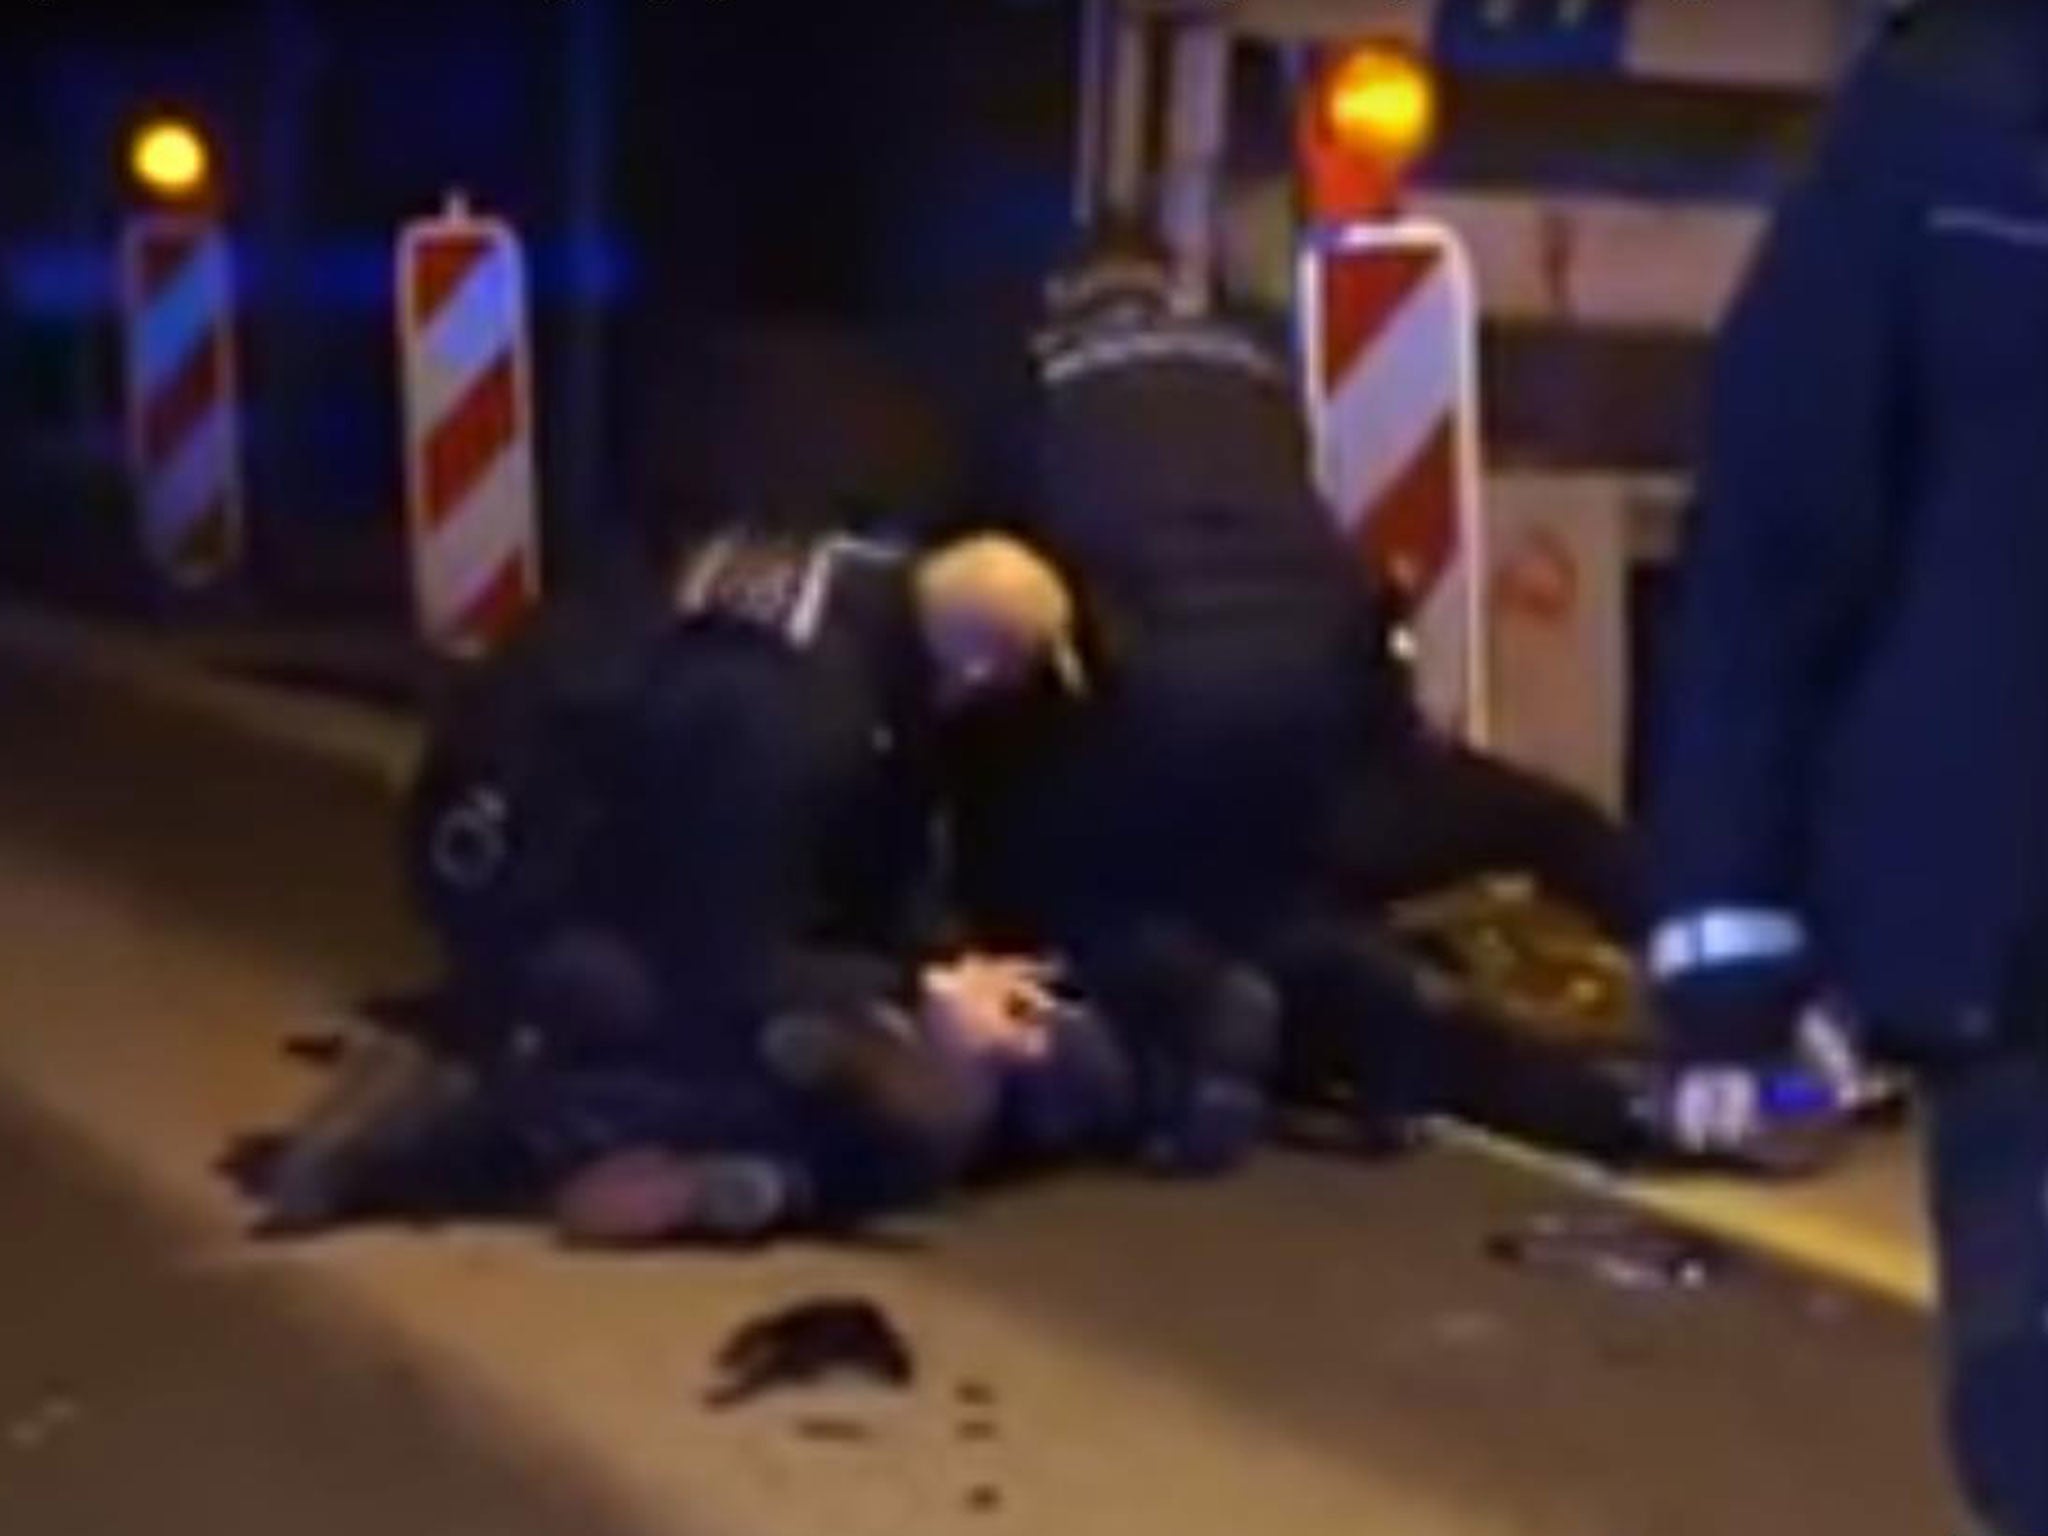 German police were caught on video beating a man in Stuttgart on 19 February